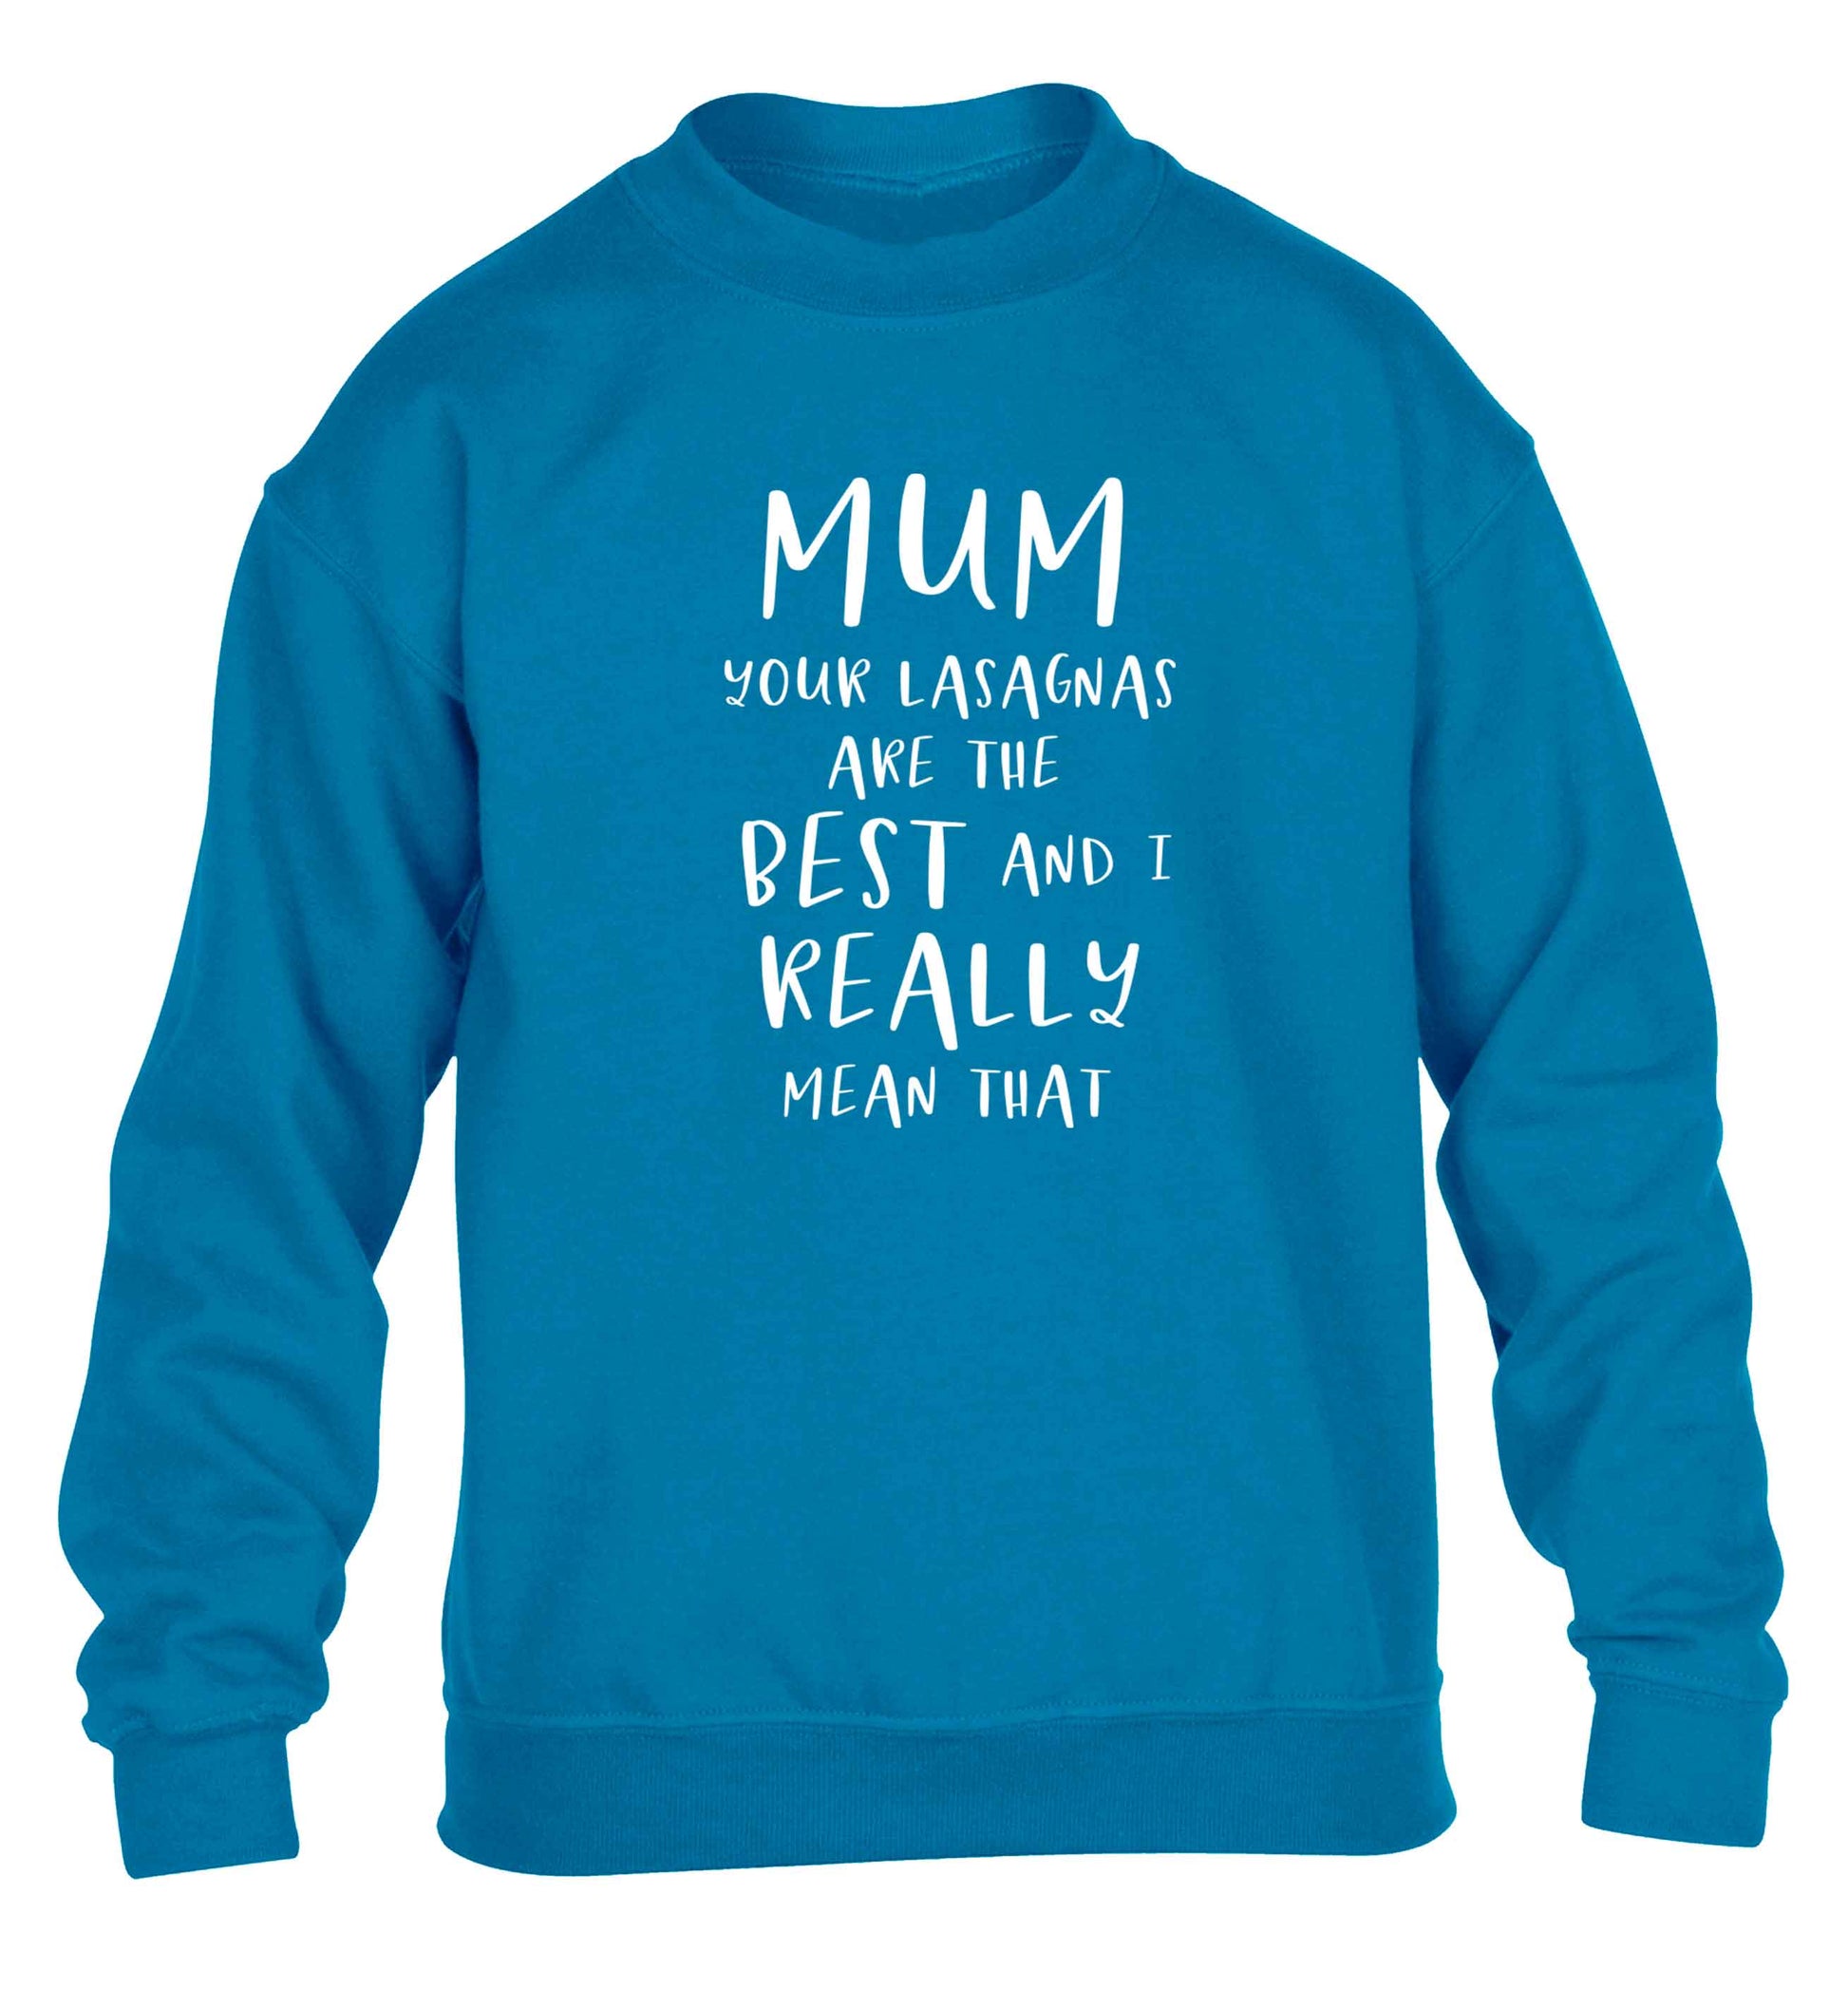 Funny gifts for your mum on mother's dayor her birthday! Mum your lasagnas are the best and I really mean that children's blue sweater 12-13 Years